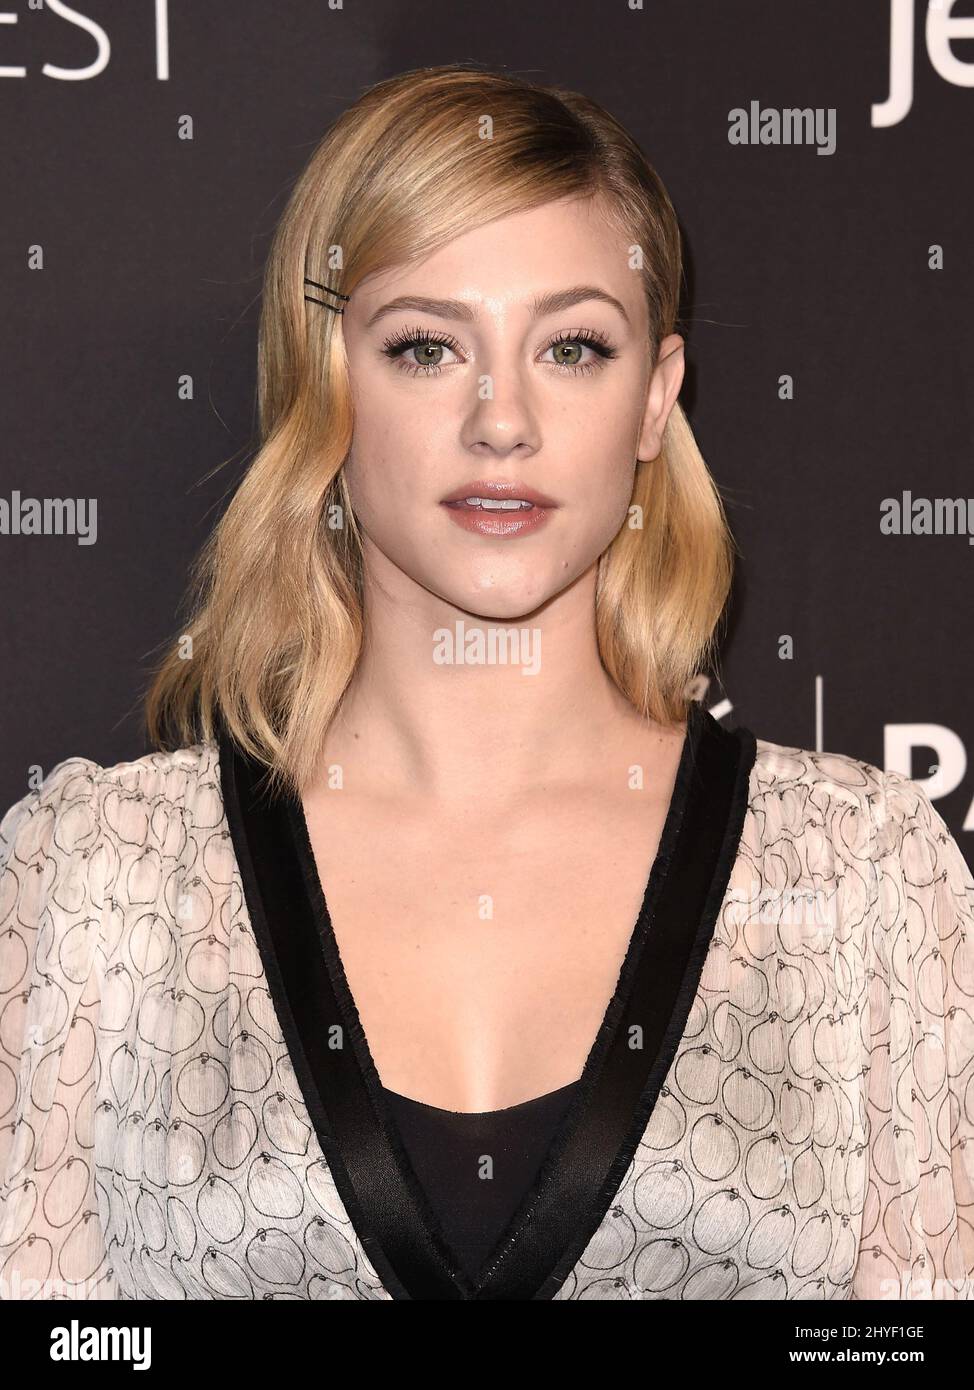 Lili Reinhart at 'Riverdale' PaleyFest Los Angeles 2018 held at the Dolby Theatre on March 25, 2018 in Hollywood, CA Stock Photo